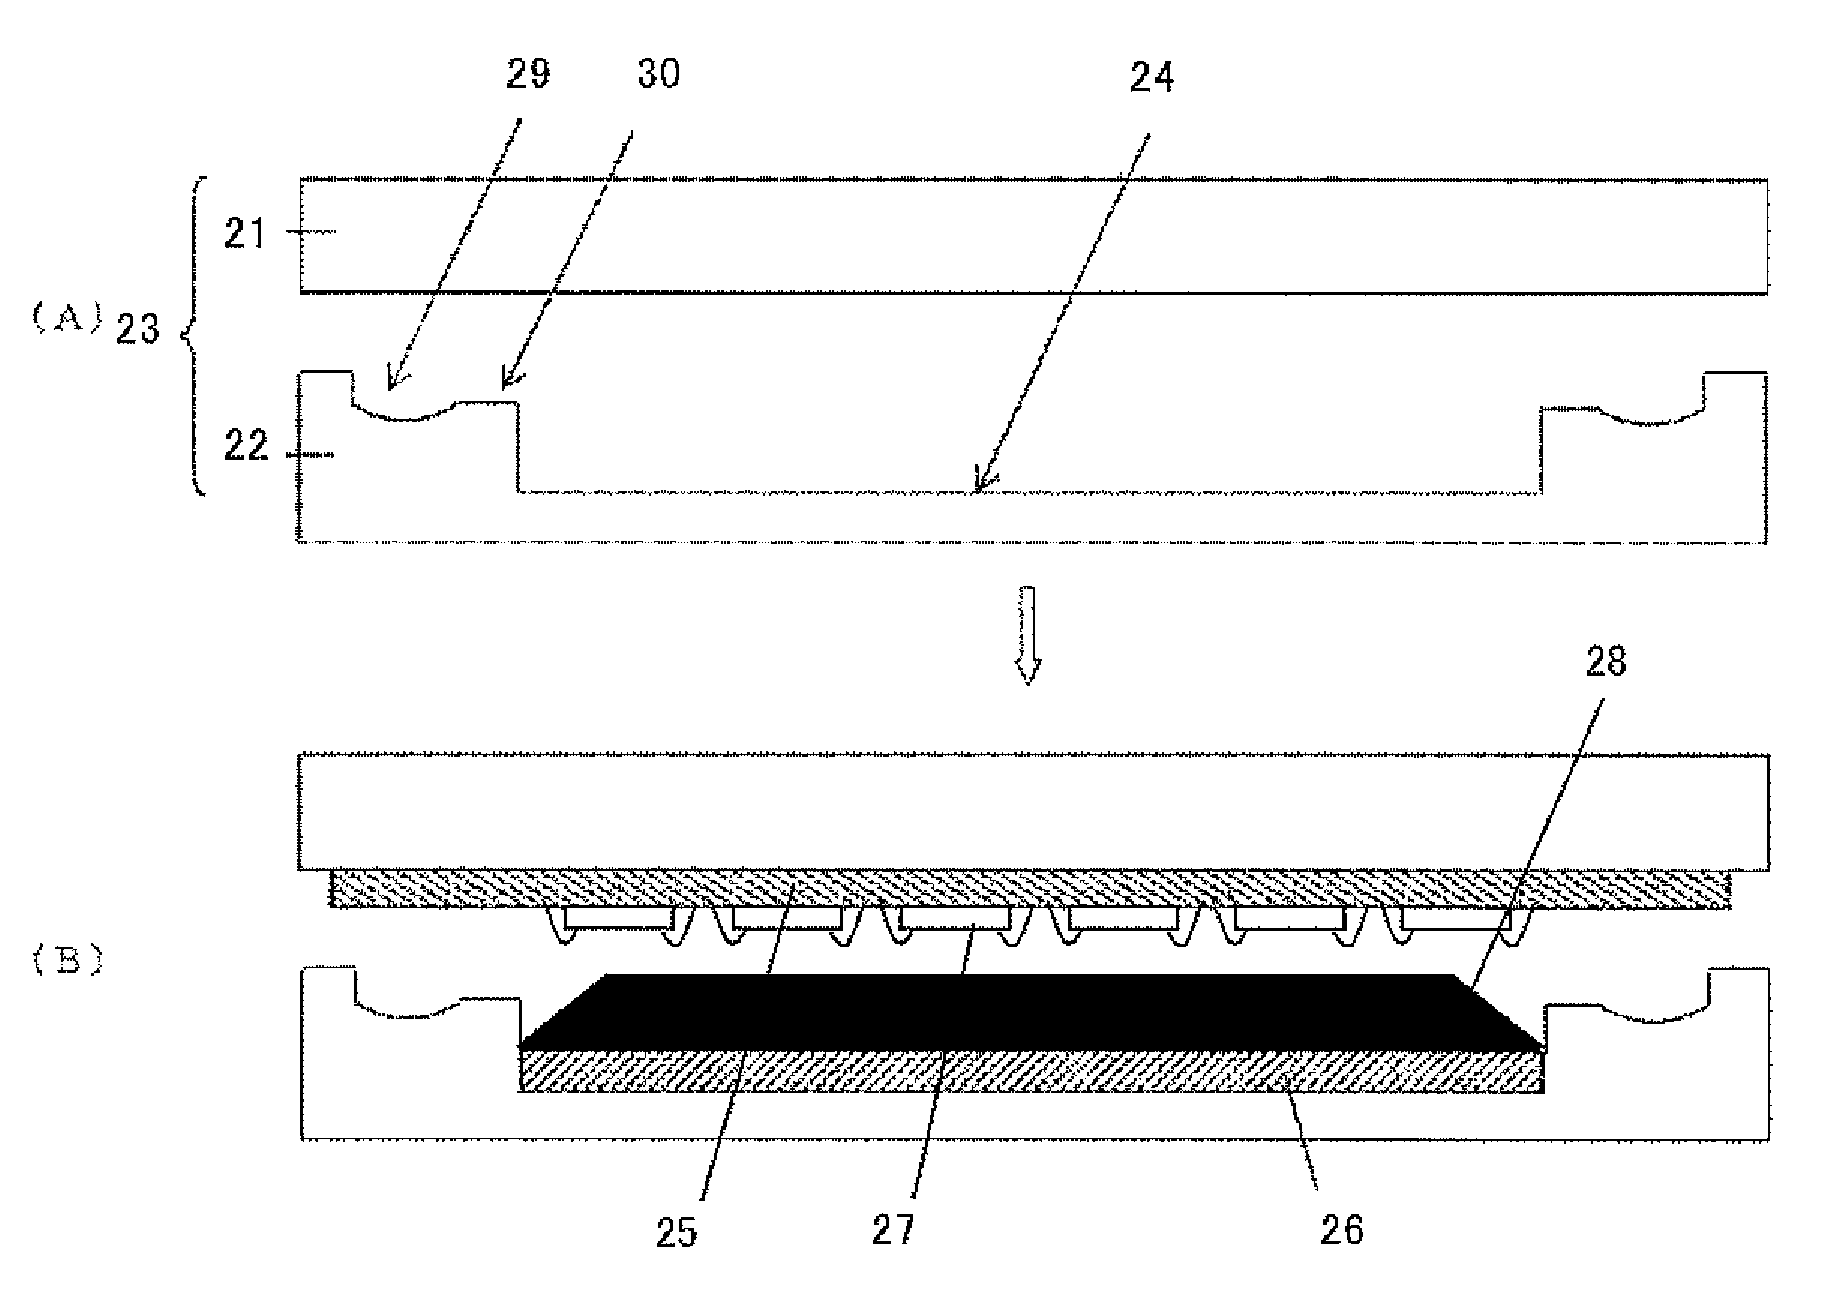 Encapsulant, encapsulated substrate having semiconductor devices mounting thereon, encapsulated wafer having semiconductor devices forming thereon, semiconductor apparatus, and method for manufacturing semiconductor apparatus